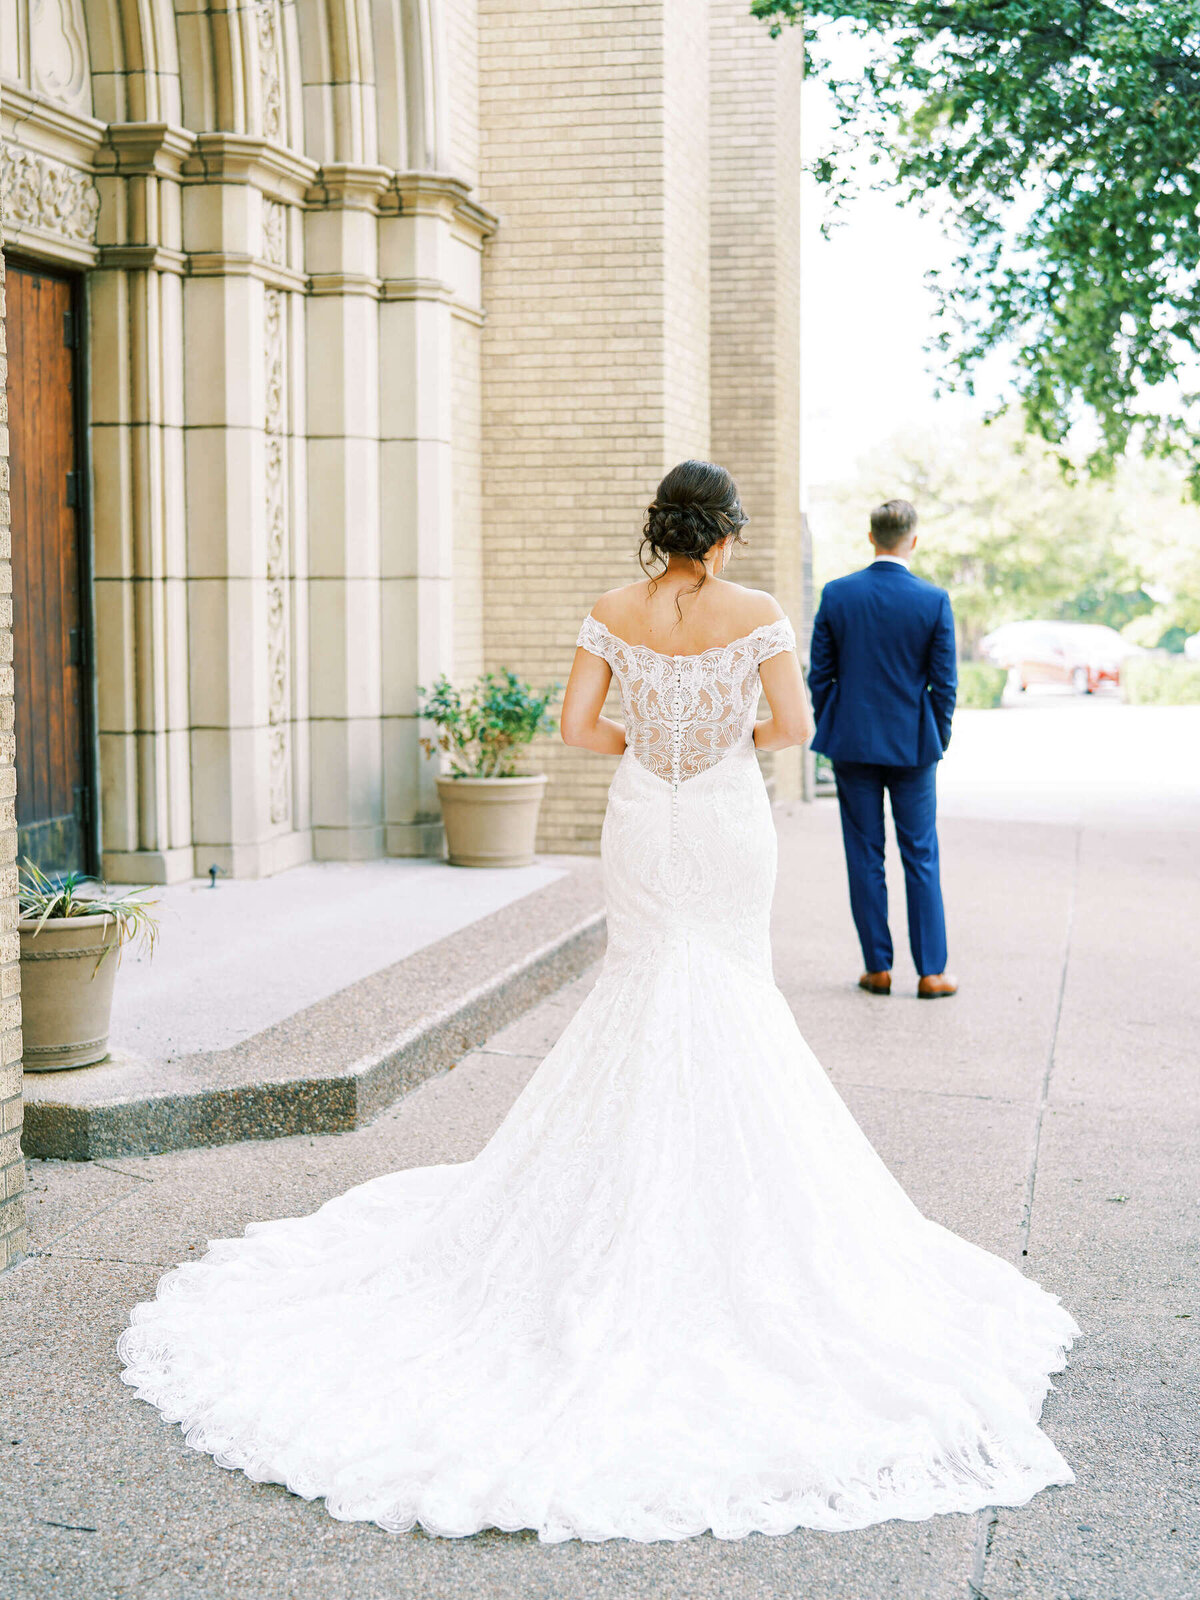 Bride approaches groom outside wedding chapel in Fort Worth